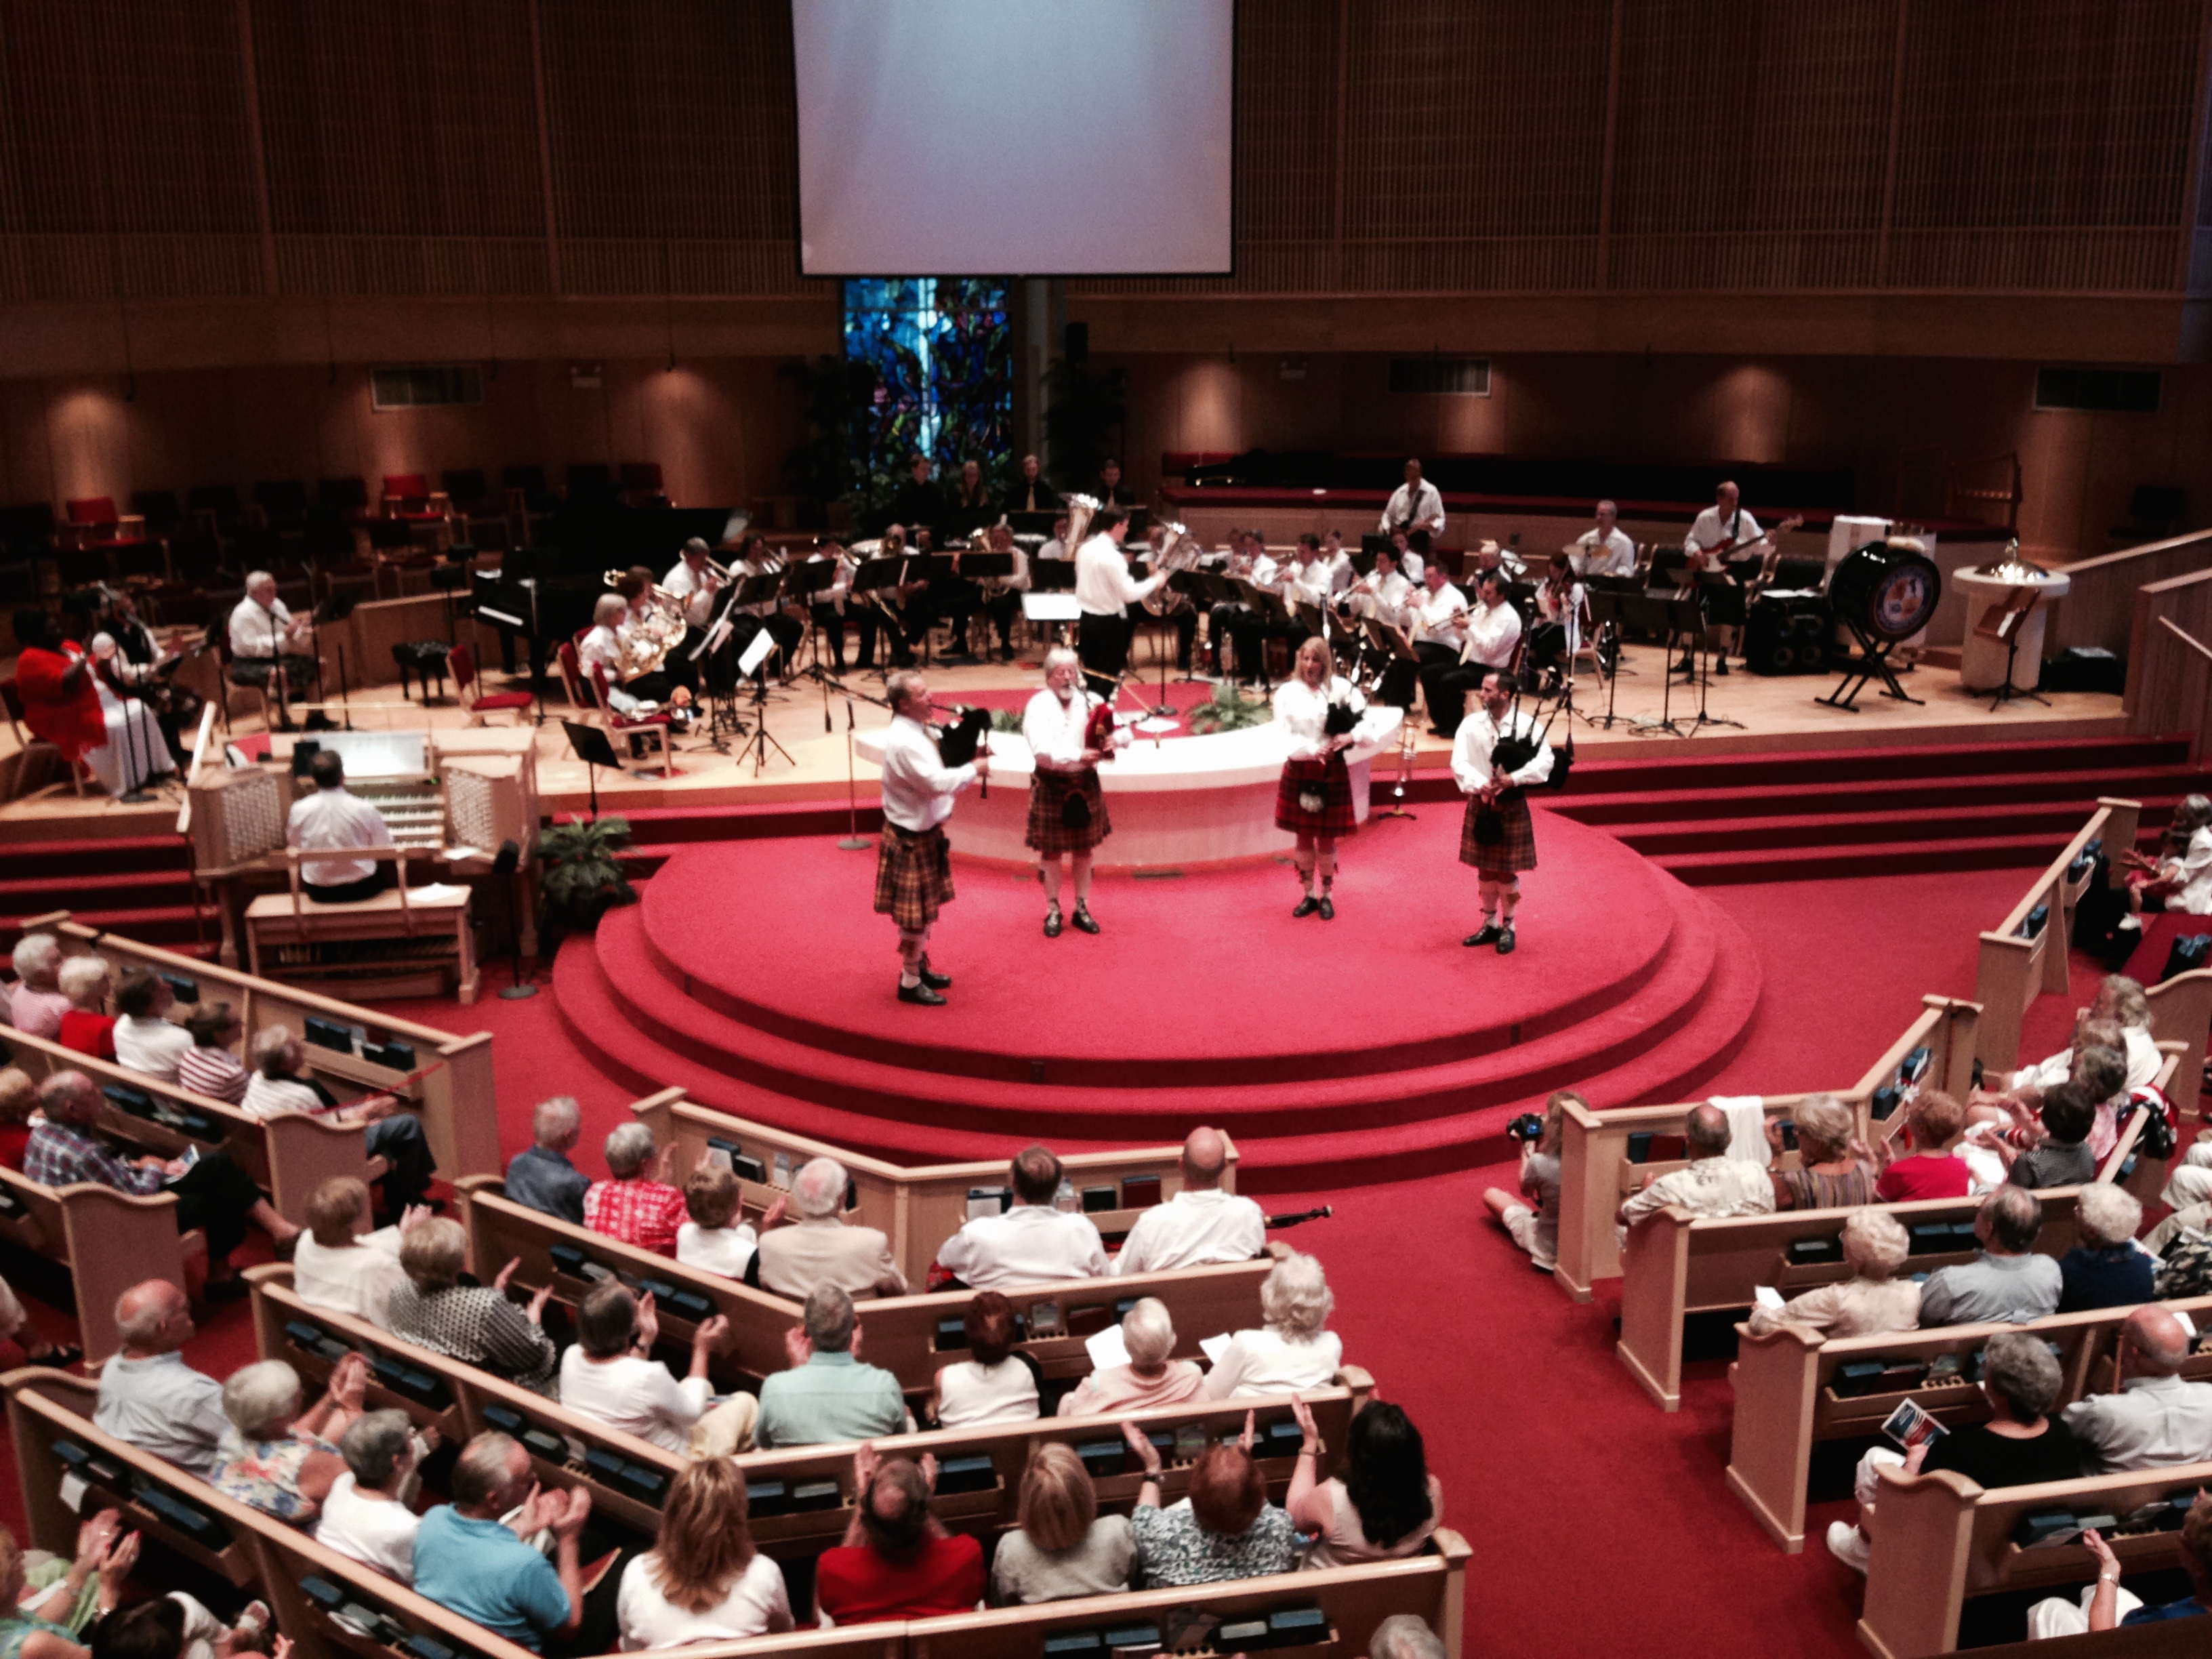 First Brass and Jacobite Band at 8th Annual Memorial Day Show at Church of the Palms - 5-25-14